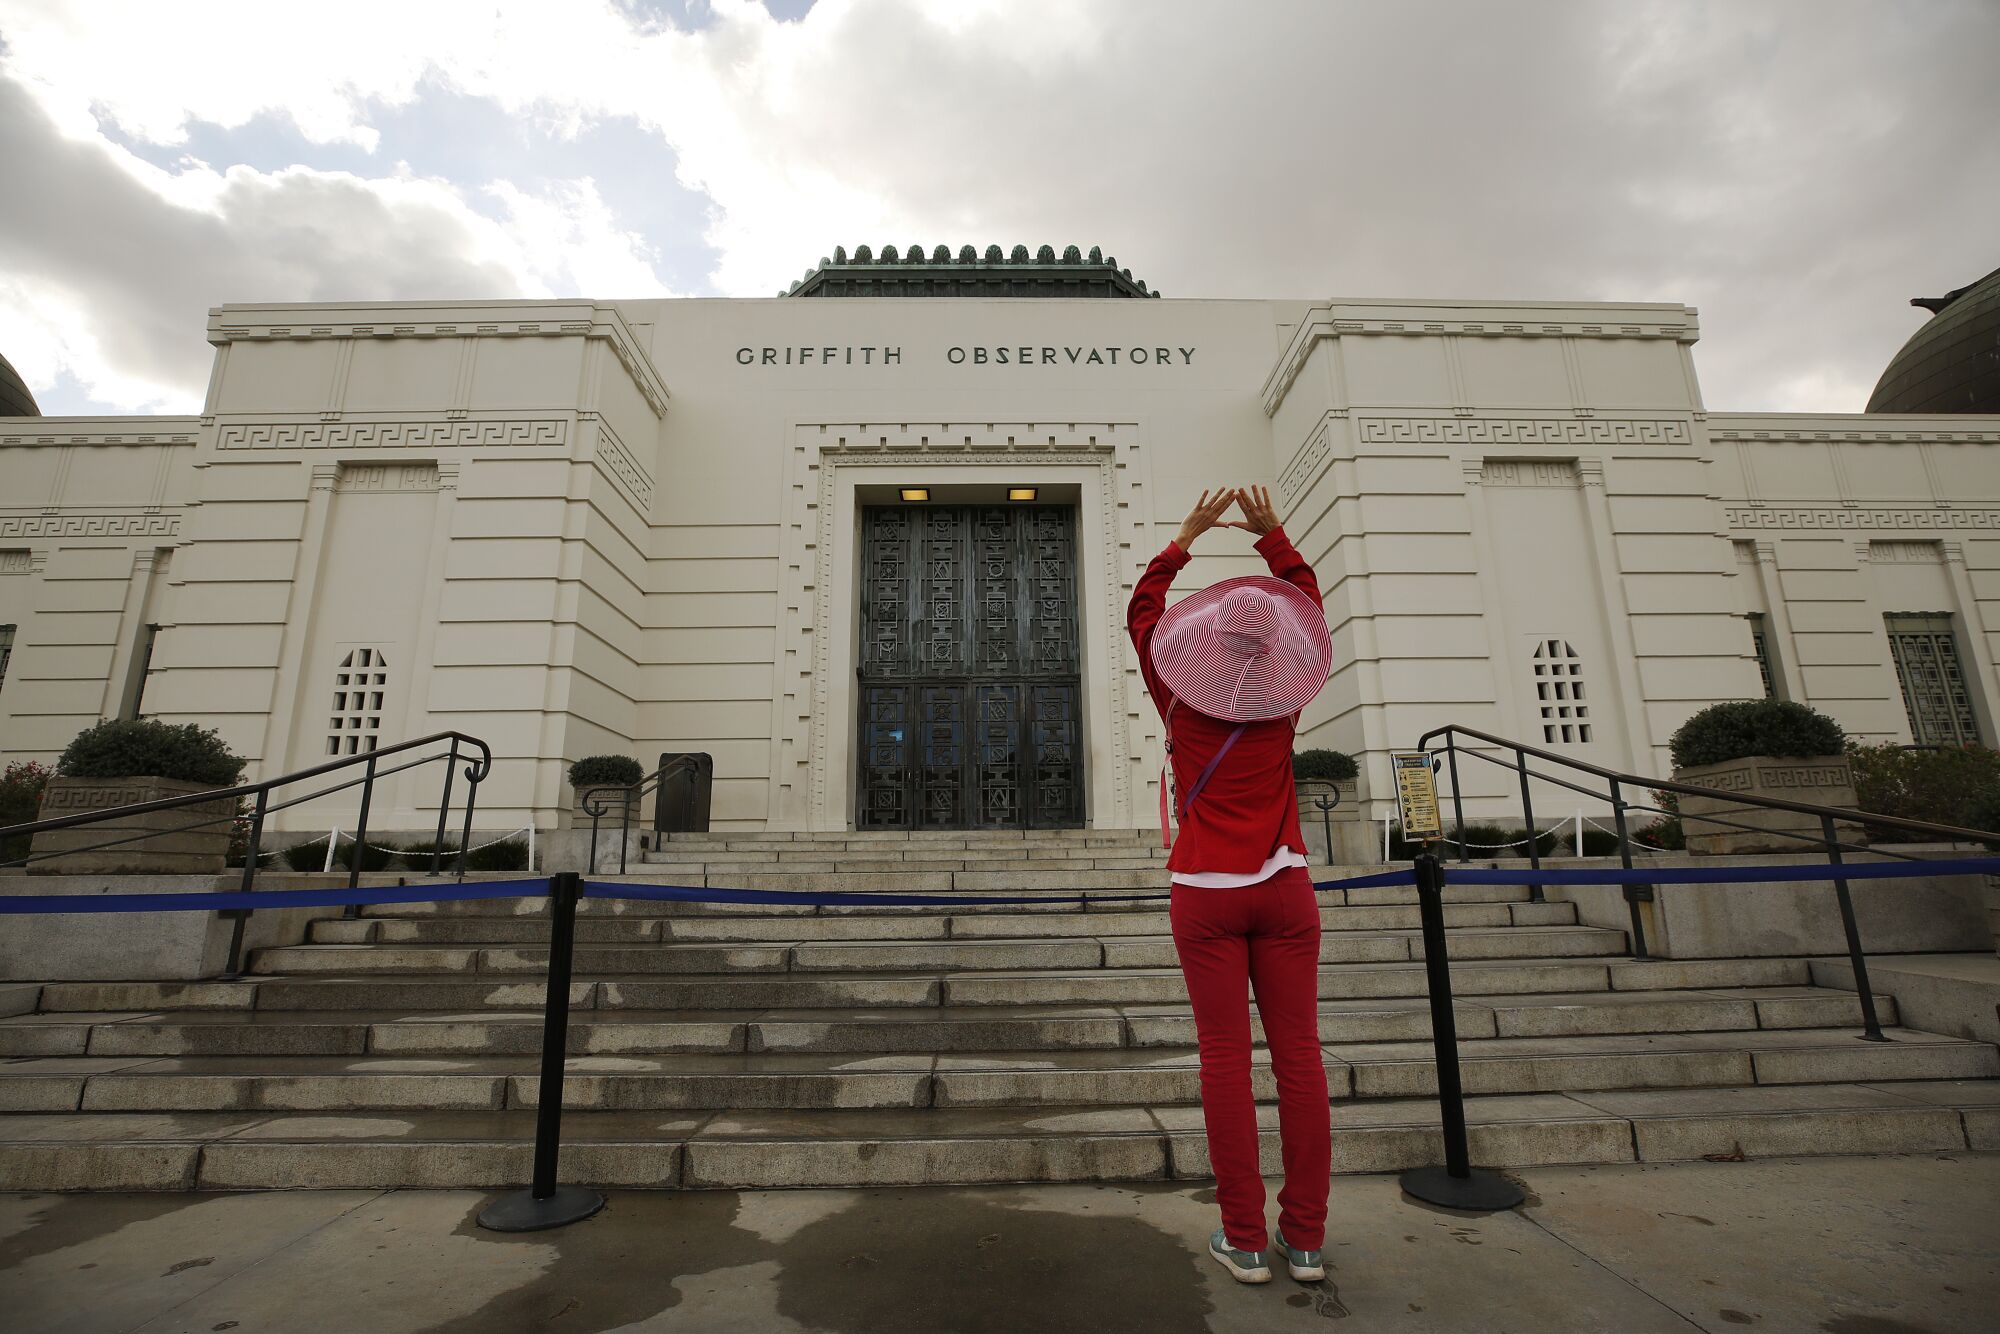 Justine Kleinman raises her arms during her walk at Griffith Observatory